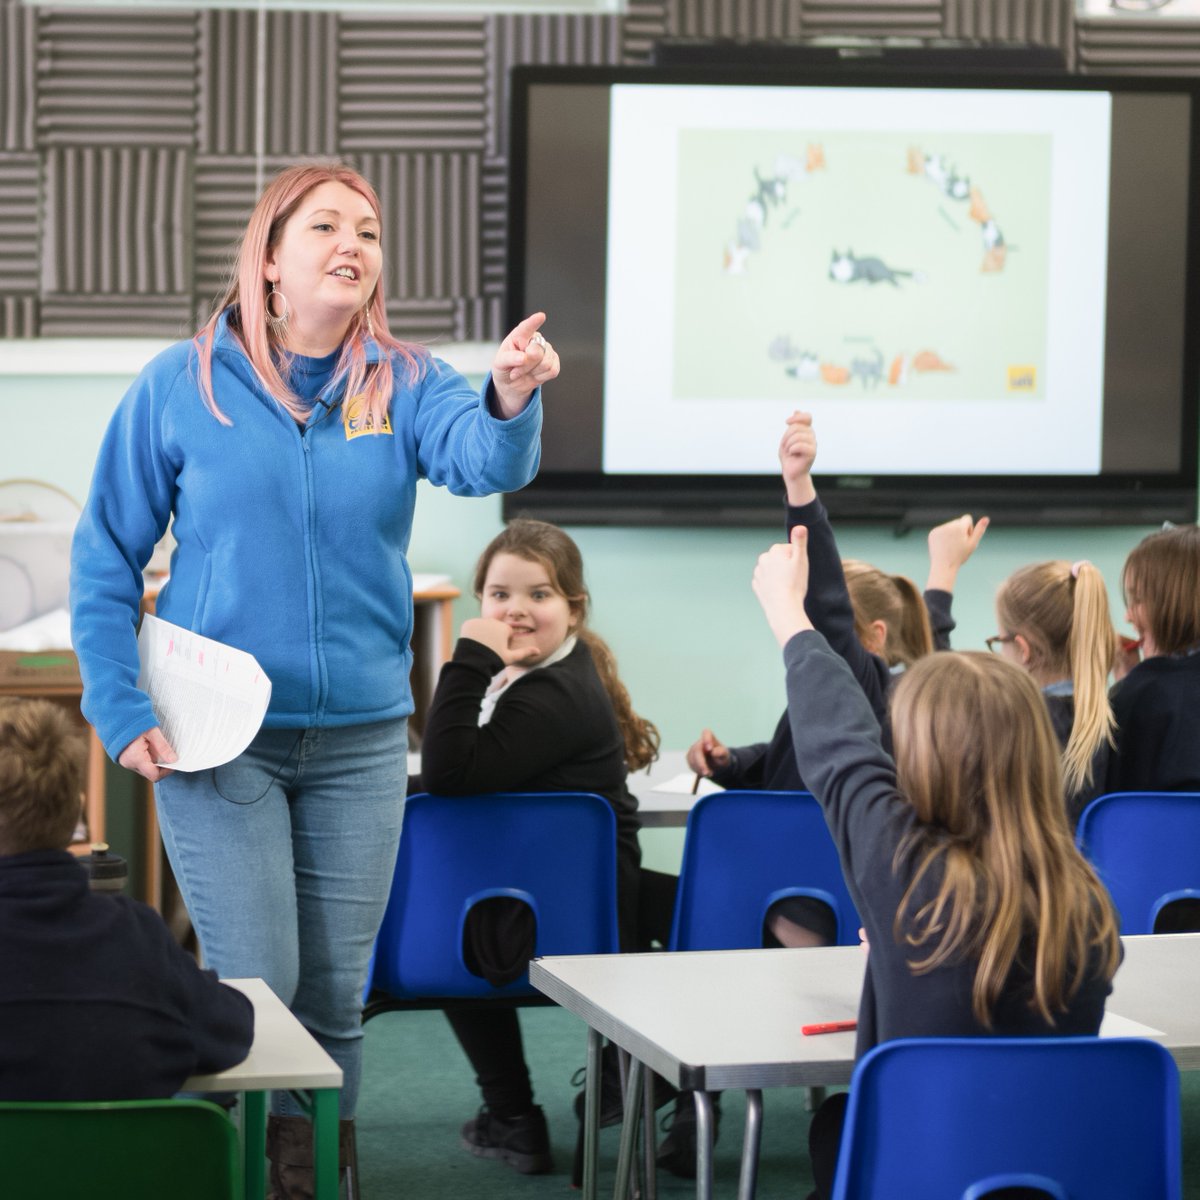 Are you a teacher? Join the Pet Education Partnership! We’ve collaborated with leading animal welfare charities across the country to create a range of free educational resources, and you can join us in shaping responsible pet owners of tomorrow: spr.ly/6013P4bCl 😺